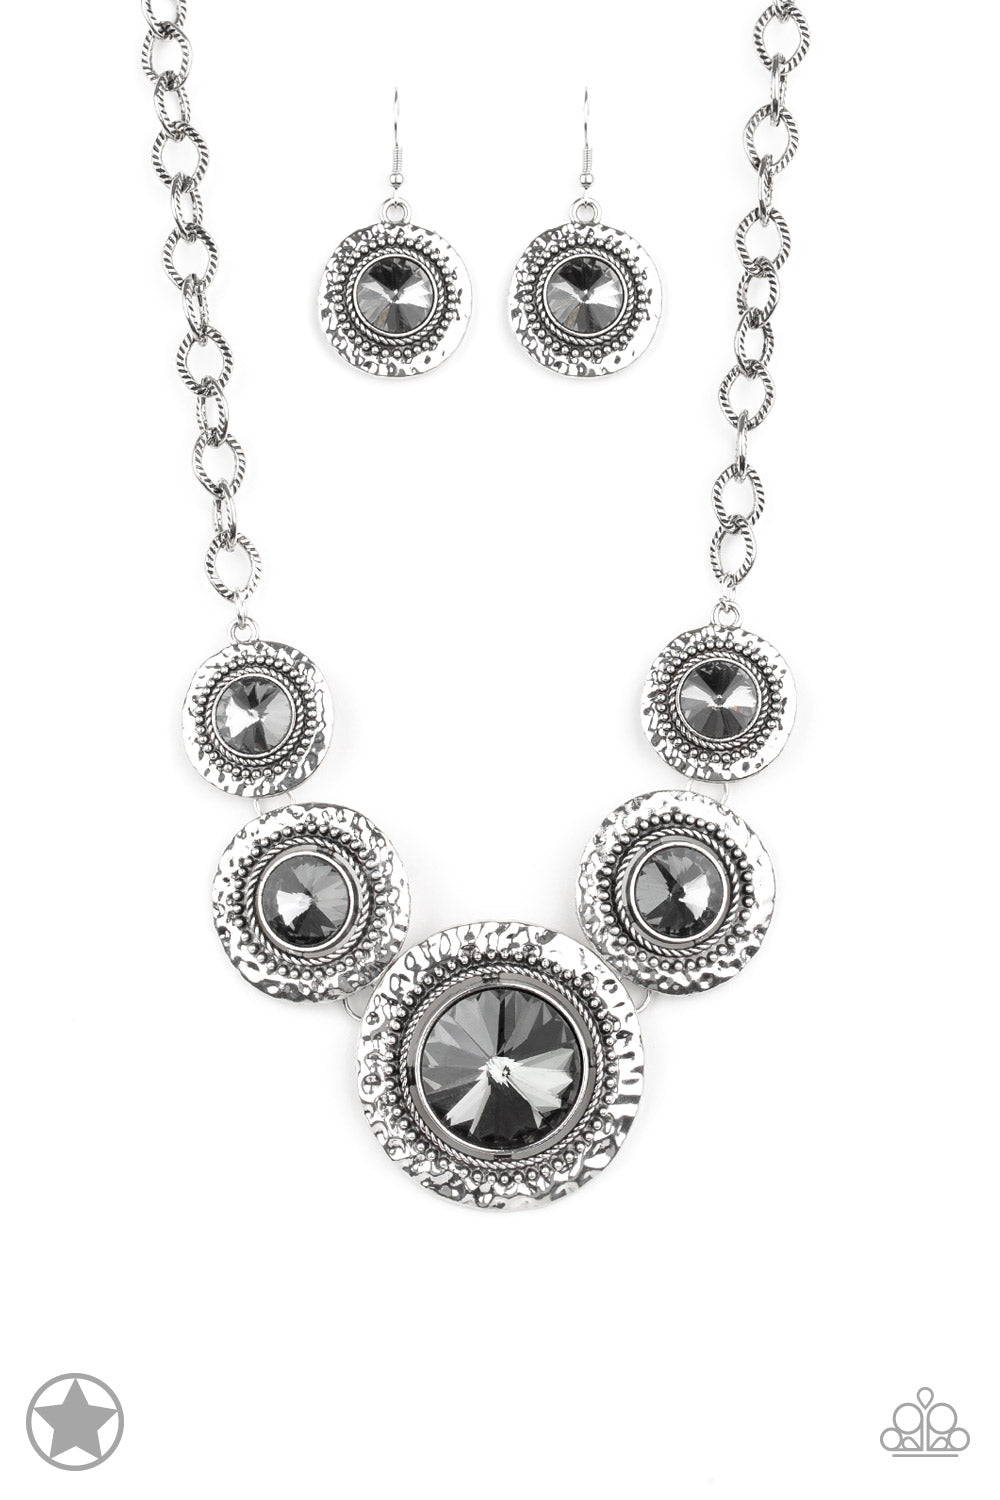 Global Glamour Necklace by Paparazzi Accessories (Blockbuster)